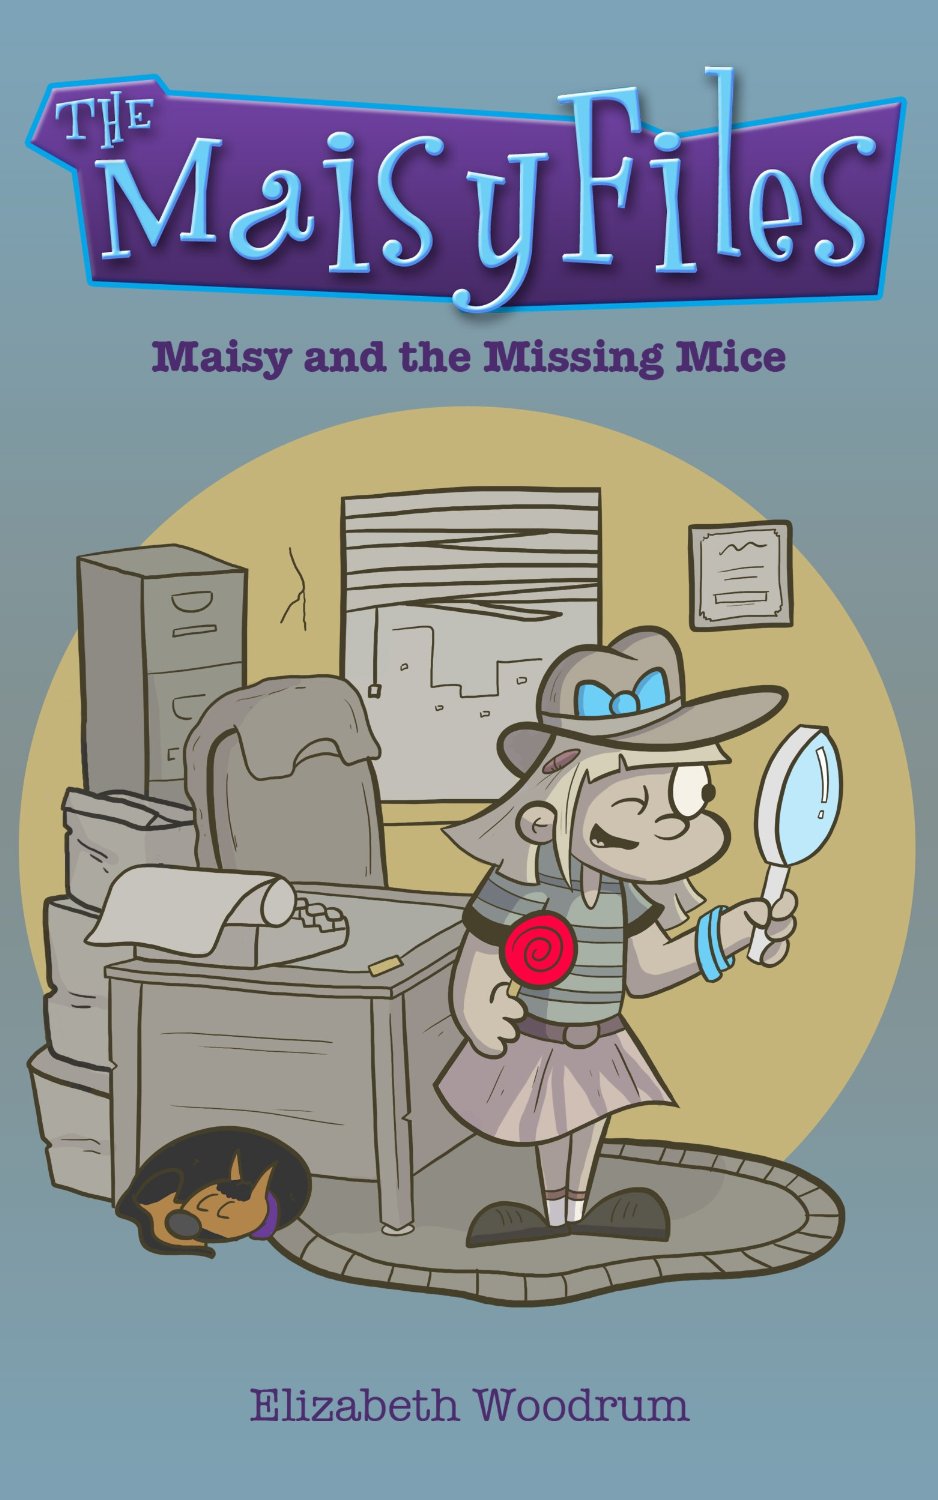 Maisy and The Missing Mice (The Maisy Files Book 1) by Elizabeth Woodrum